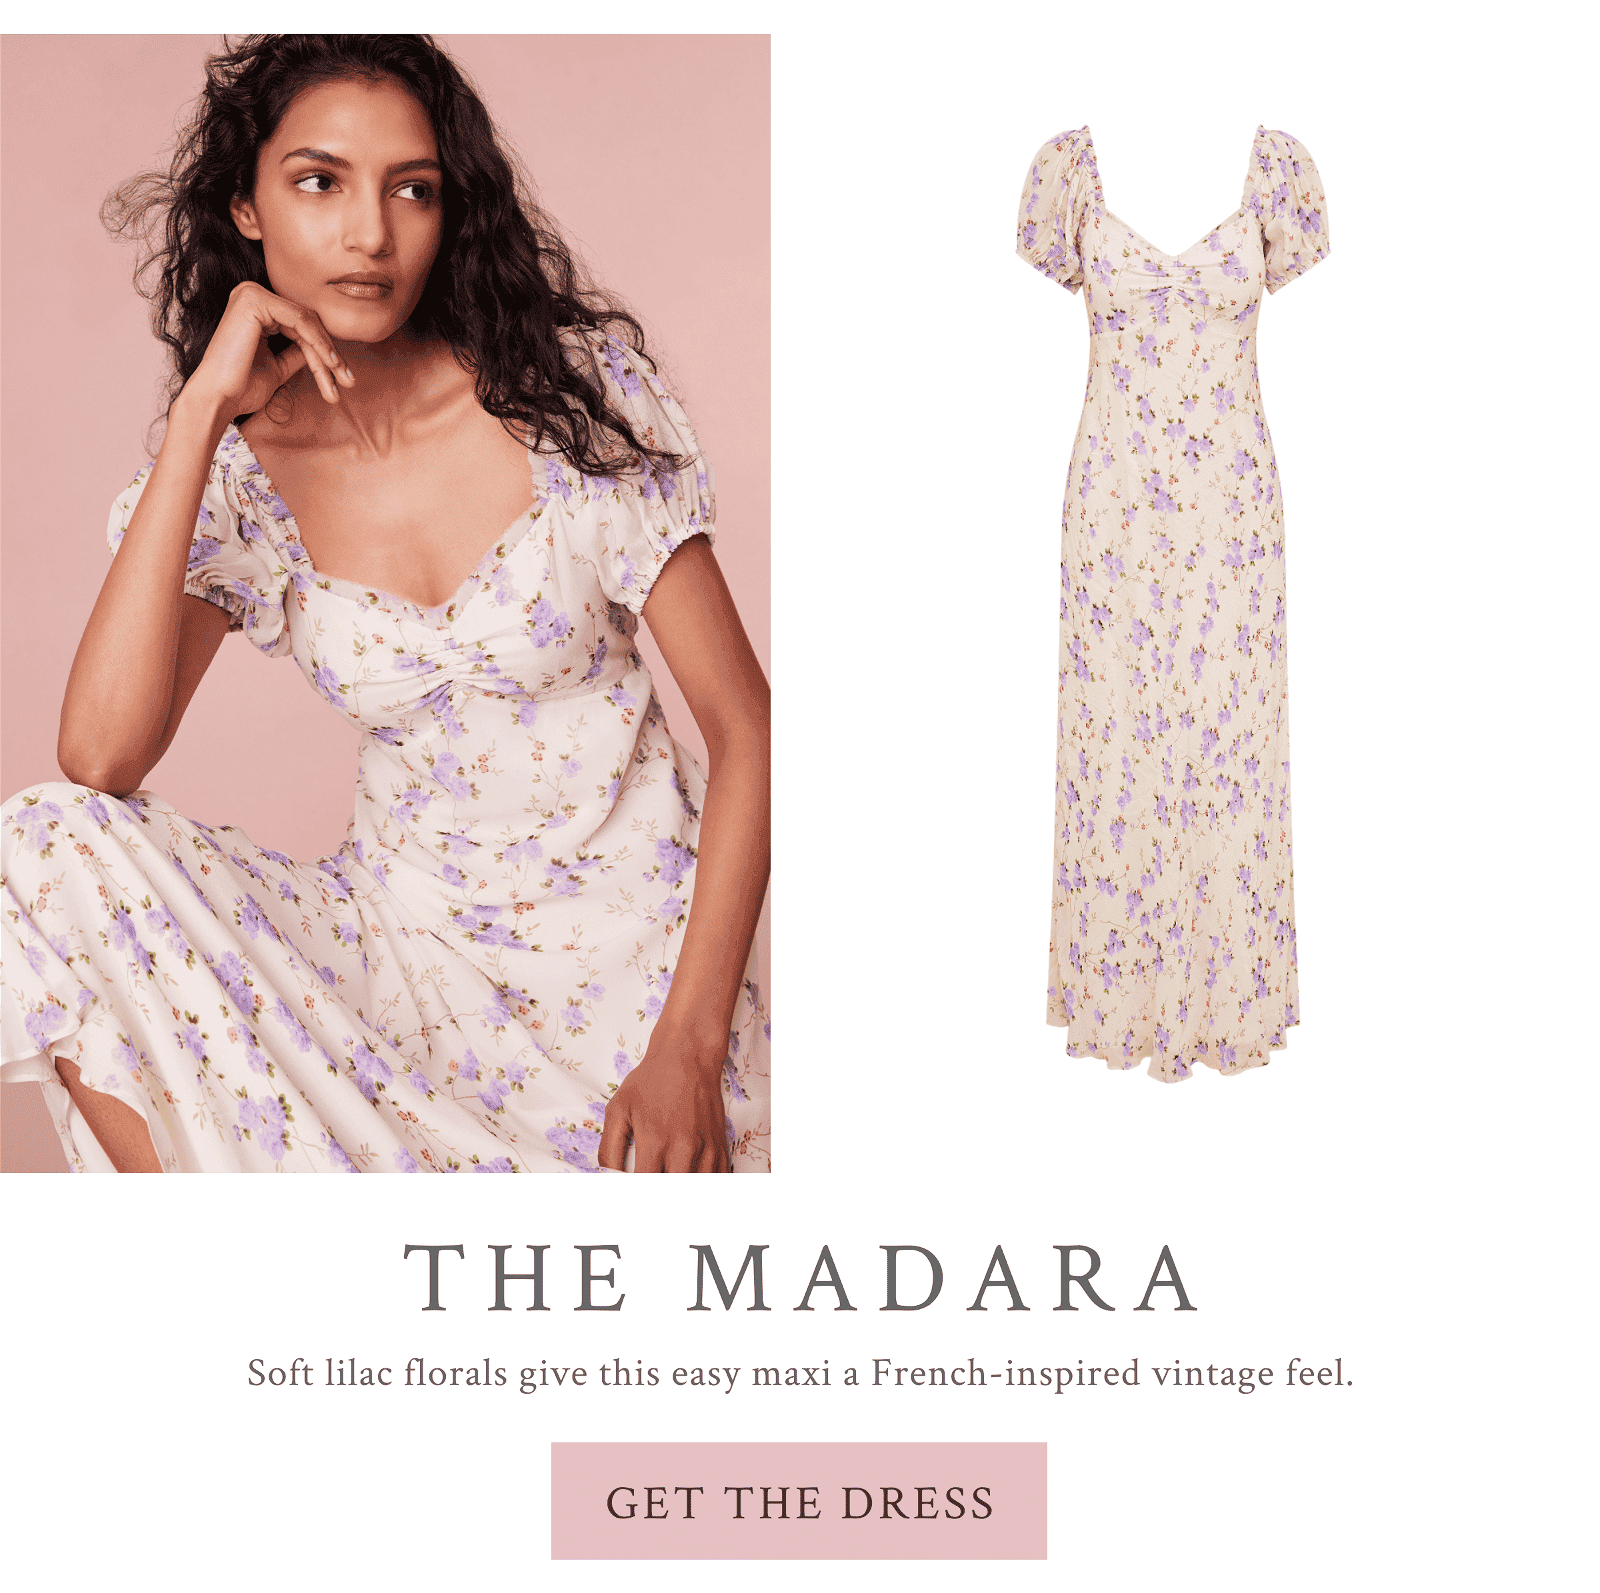 The Madara - Soft lilac florals give this easy maxi a French-inspired vintage feel.